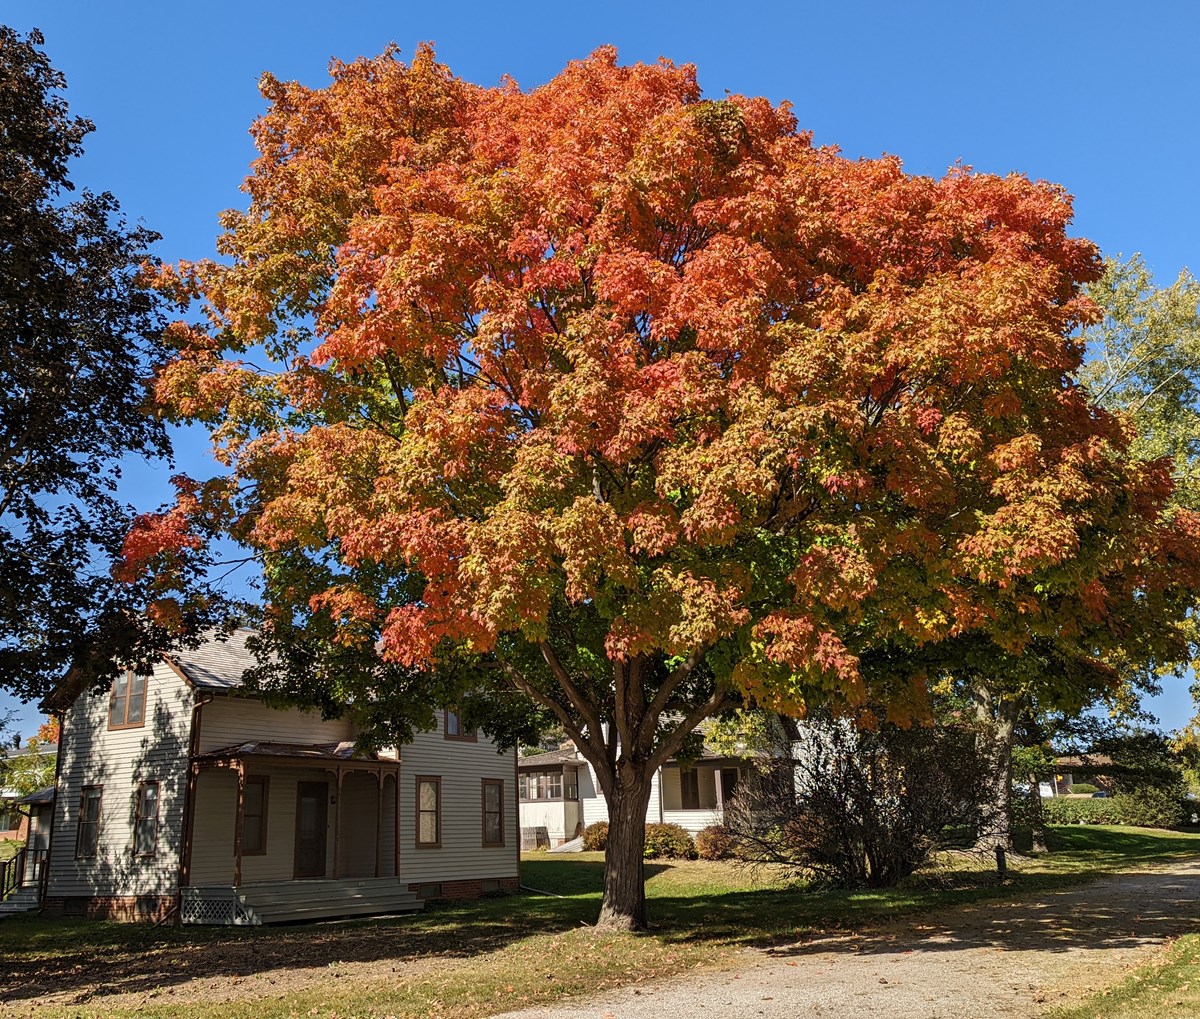 An historic home with large, colorful maple tree in the foreground. Red, yellow and orange leaves against a clear blue sky.